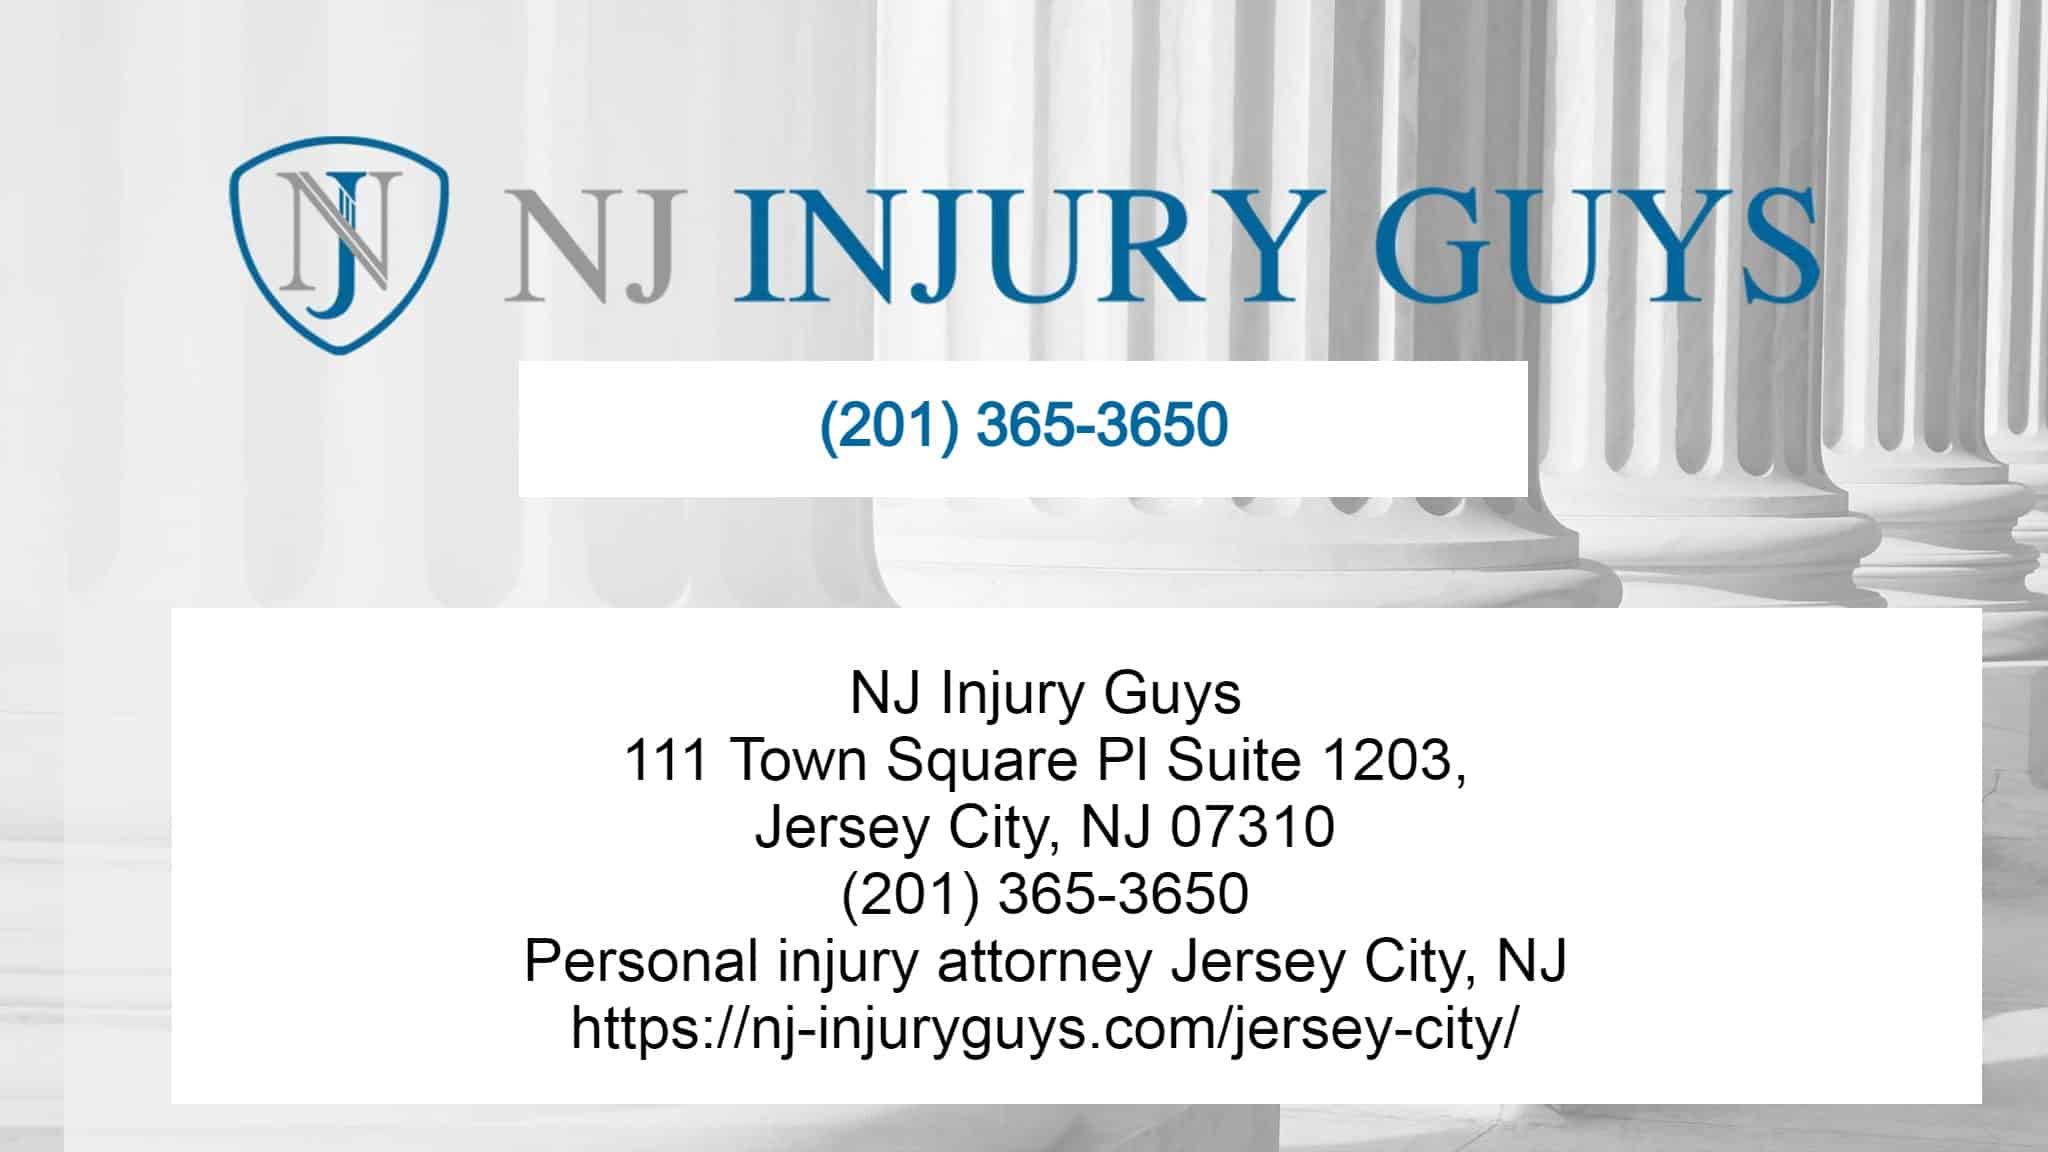 Jersey City Lawyers Offer No-Win No-Fee Representation For Birth Injury Victims